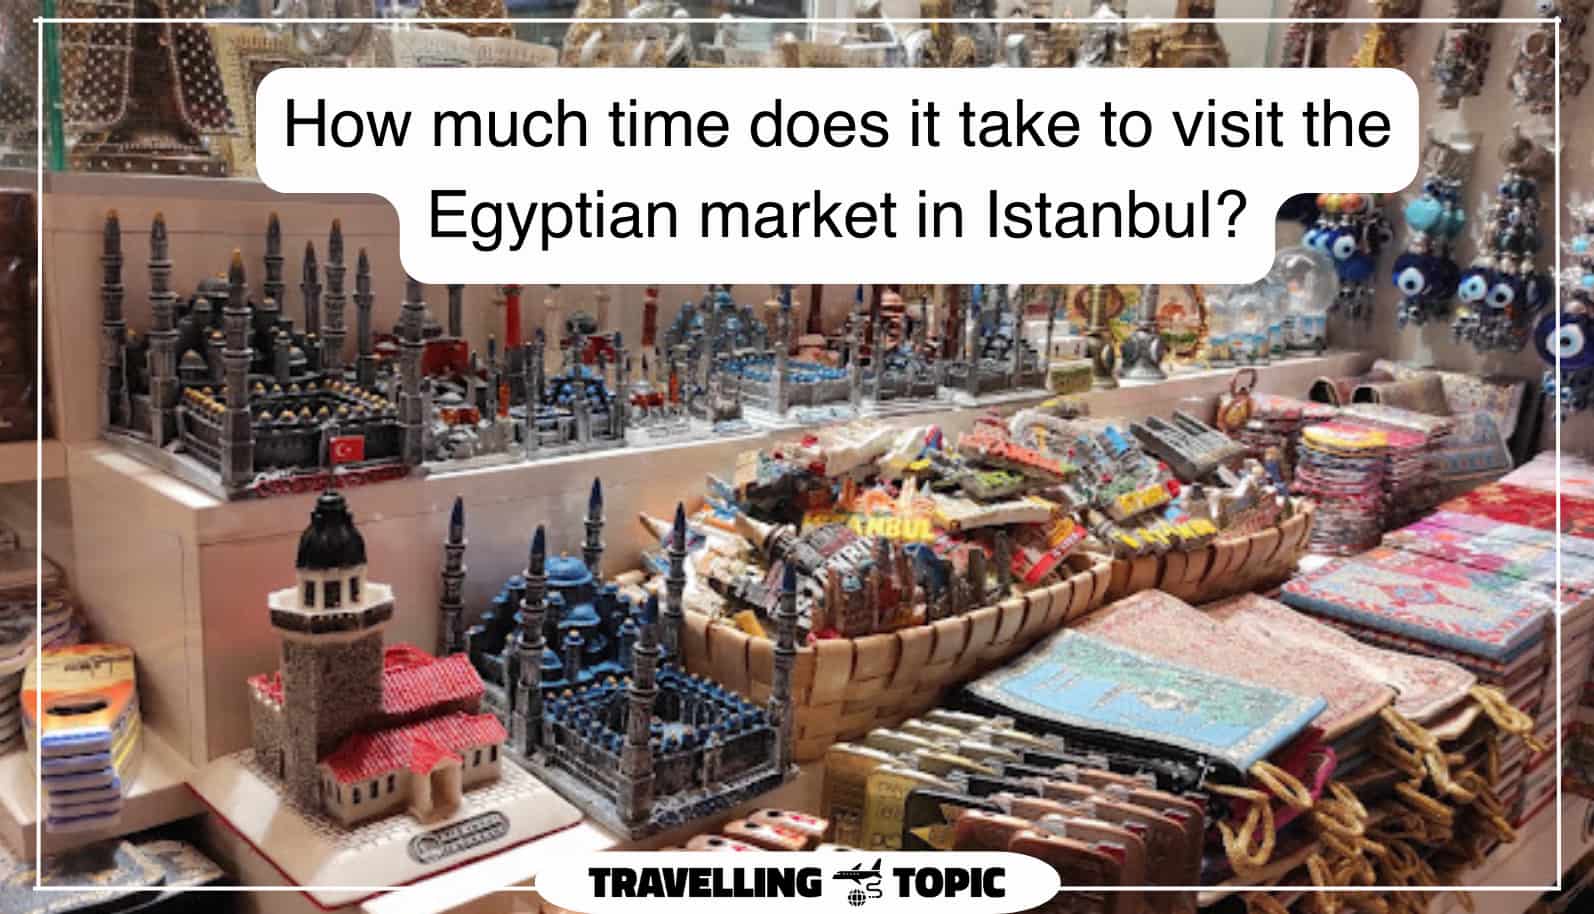 How much time does it take to visit the Egyptian market in Istanbul